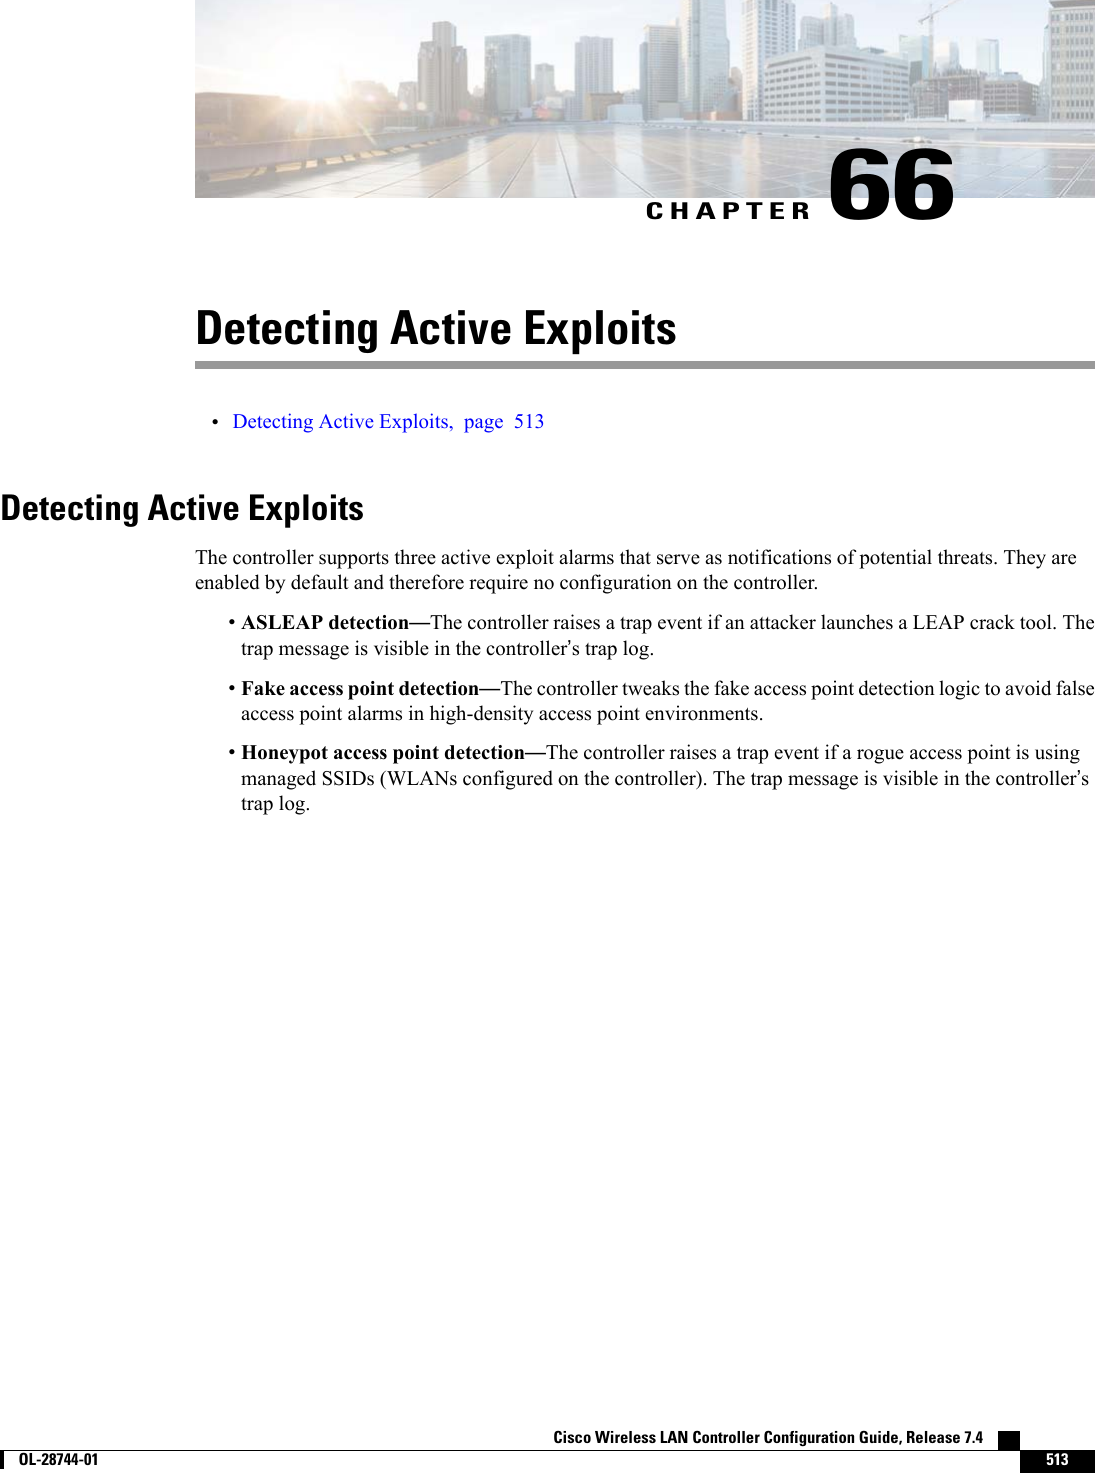 CHAPTER 66Detecting Active Exploits•Detecting Active Exploits, page 513Detecting Active ExploitsThe controller supports three active exploit alarms that serve as notifications of potential threats. They areenabled by default and therefore require no configuration on the controller.•ASLEAP detection—The controller raises a trap event if an attacker launches a LEAP crack tool. Thetrap message is visible in the controller’s trap log.•Fake access point detection—The controller tweaks the fake access point detection logic to avoid falseaccess point alarms in high-density access point environments.•Honeypot access point detection—The controller raises a trap event if a rogue access point is usingmanaged SSIDs (WLANs configured on the controller). The trap message is visible in the controller’strap log.Cisco Wireless LAN Controller Configuration Guide, Release 7.4        OL-28744-01 513